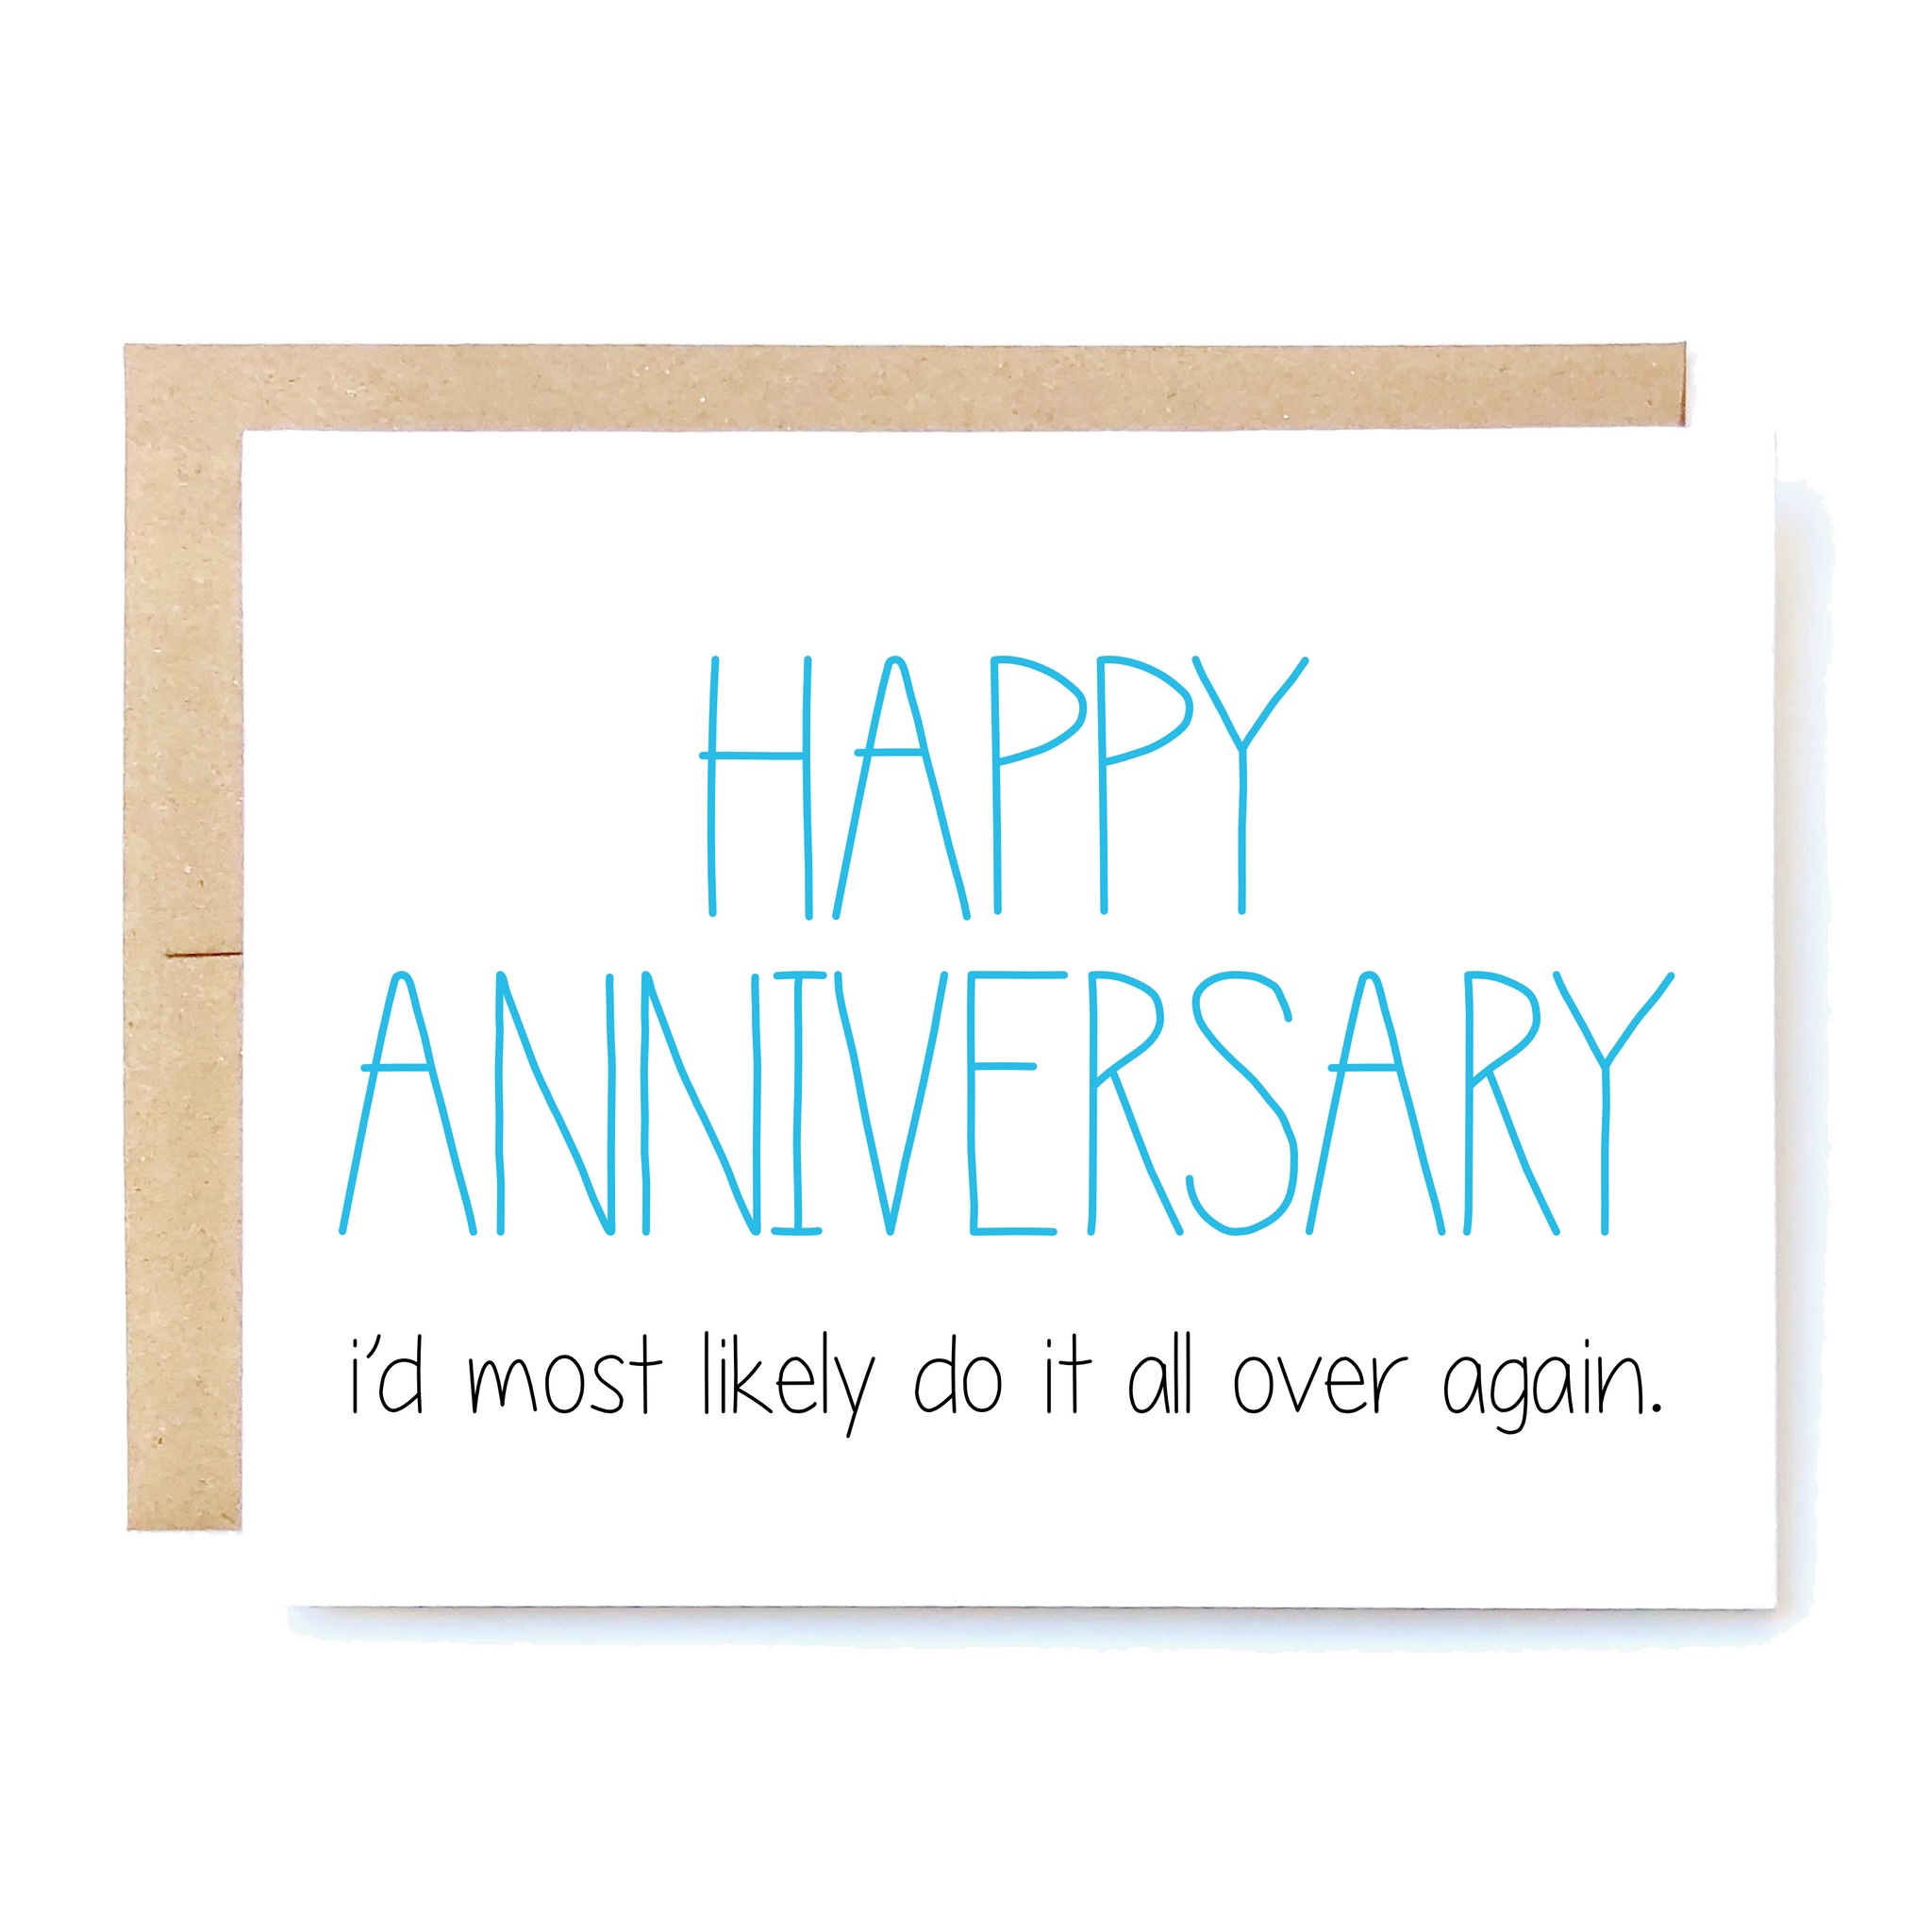 Card Front: Happy anniversary. I'd most likely do it all over again.